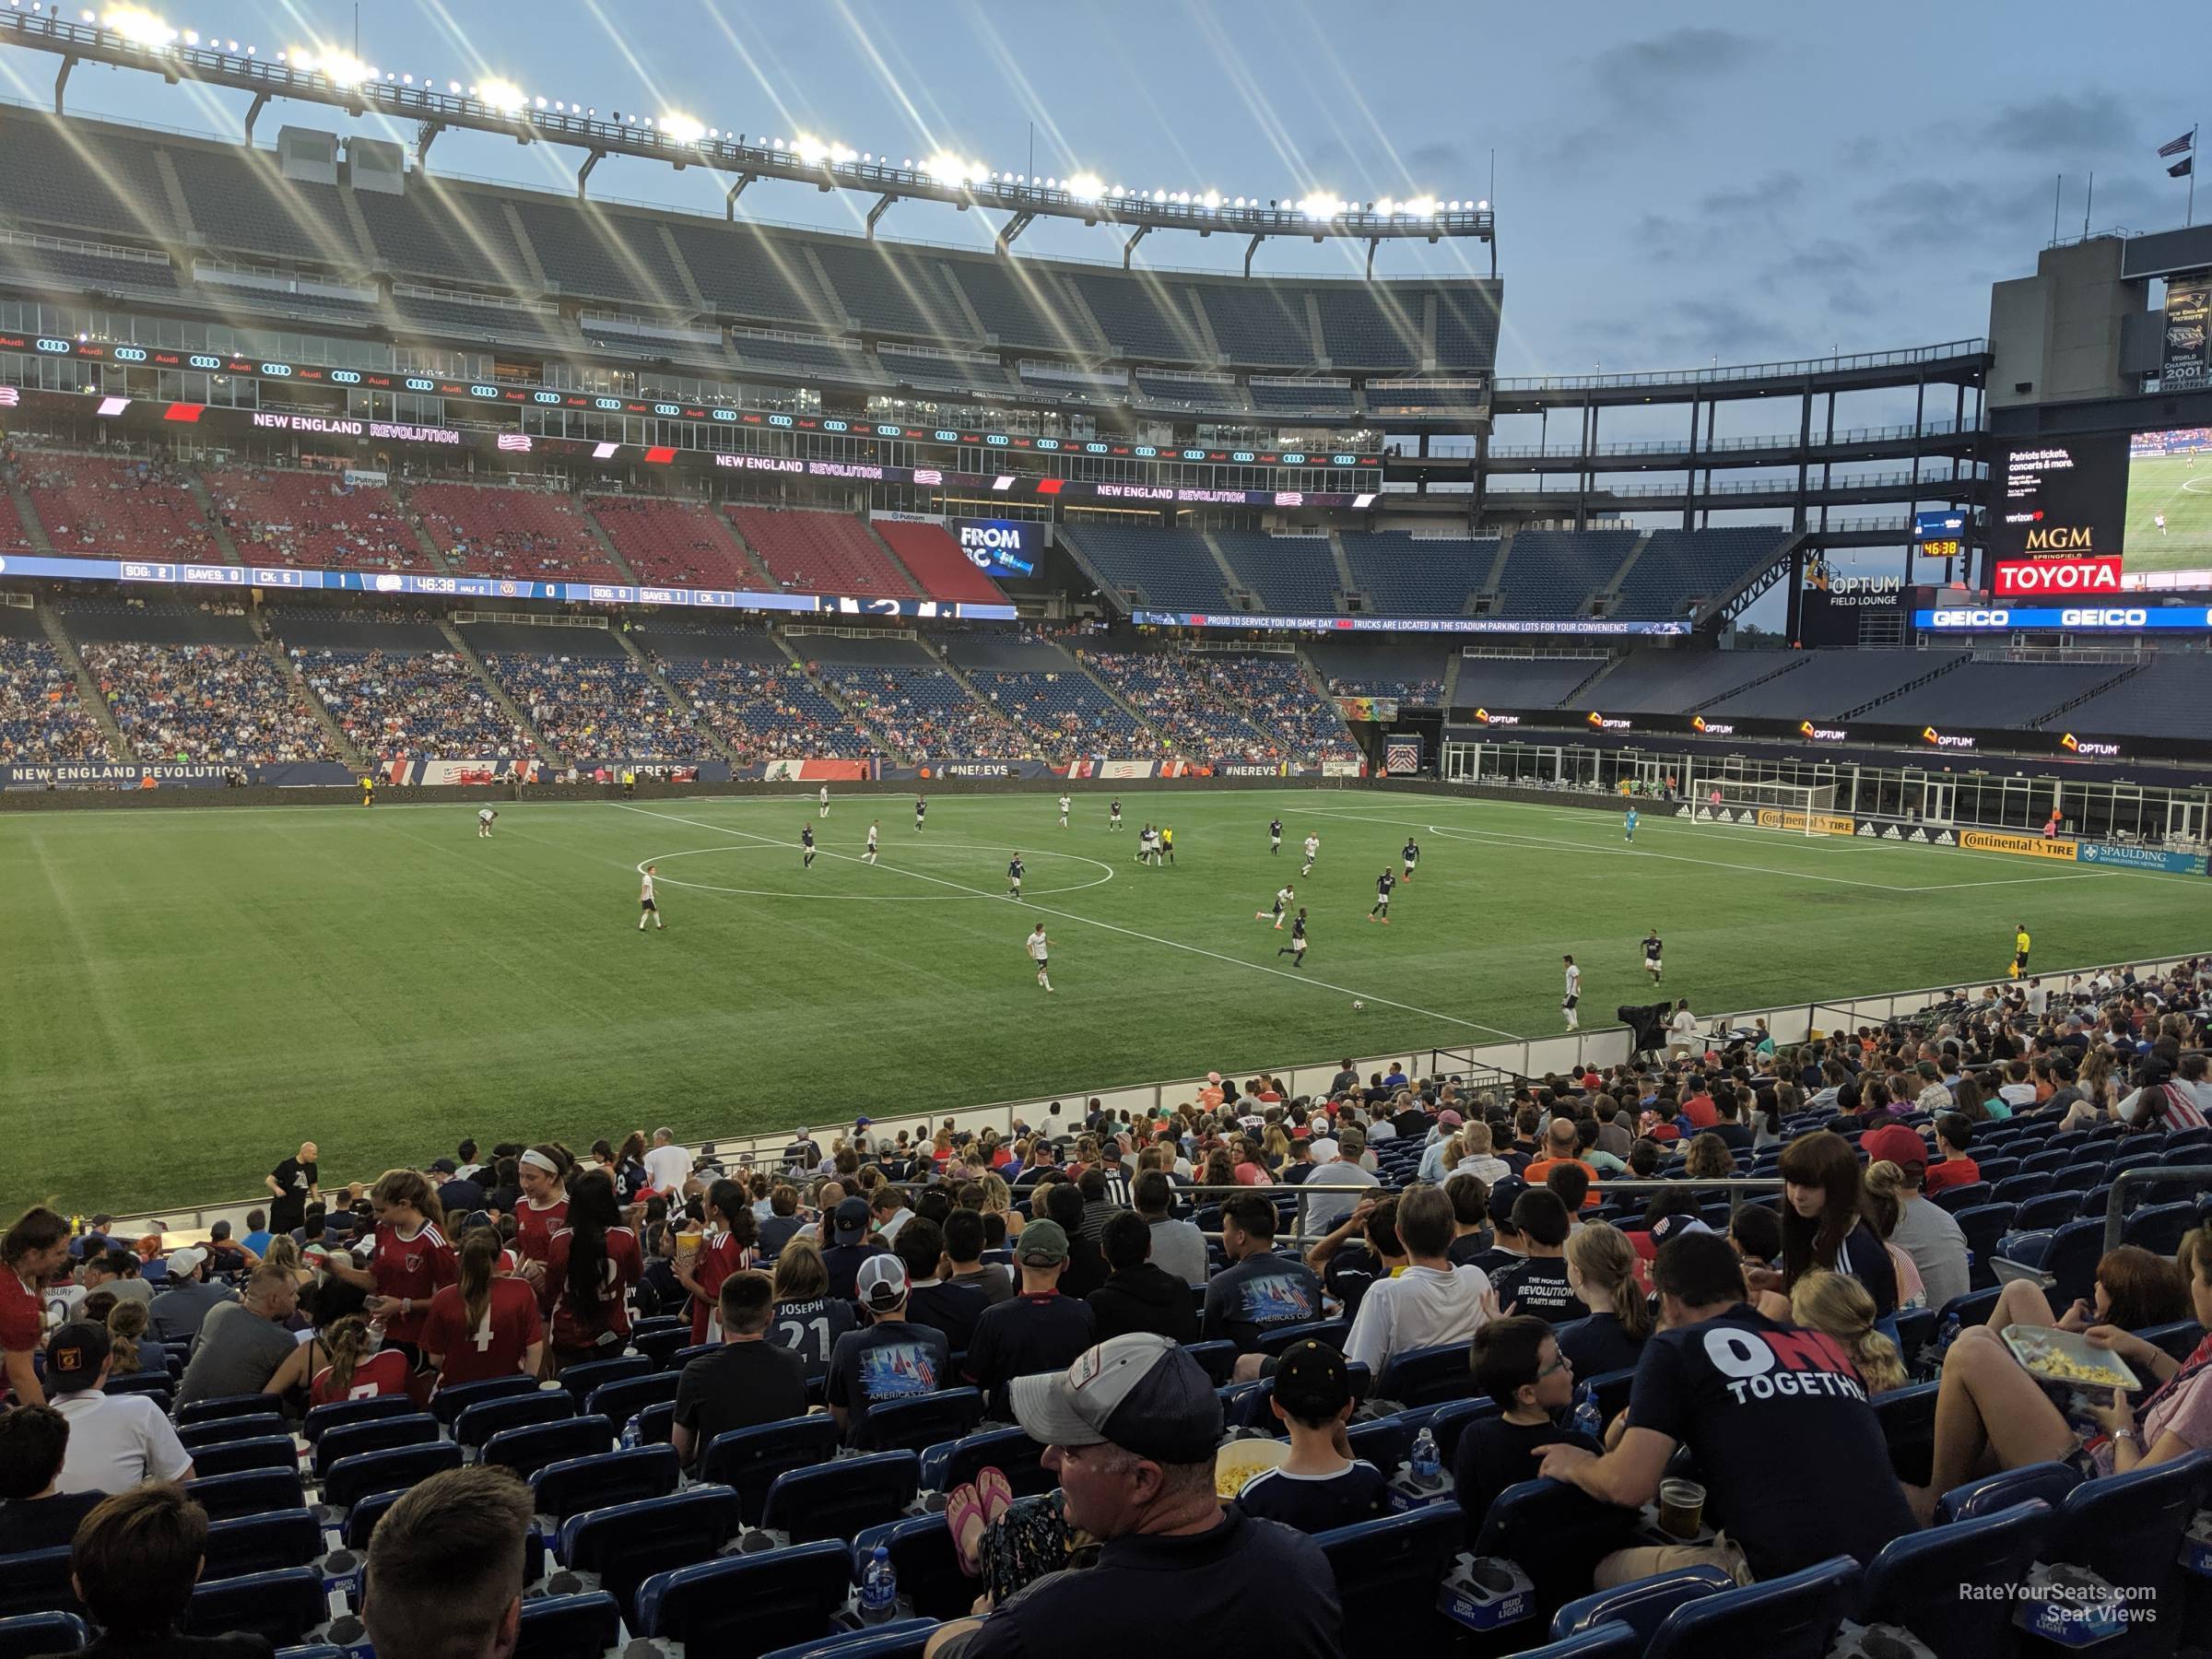 section 134, row 25 seat view  for soccer - gillette stadium